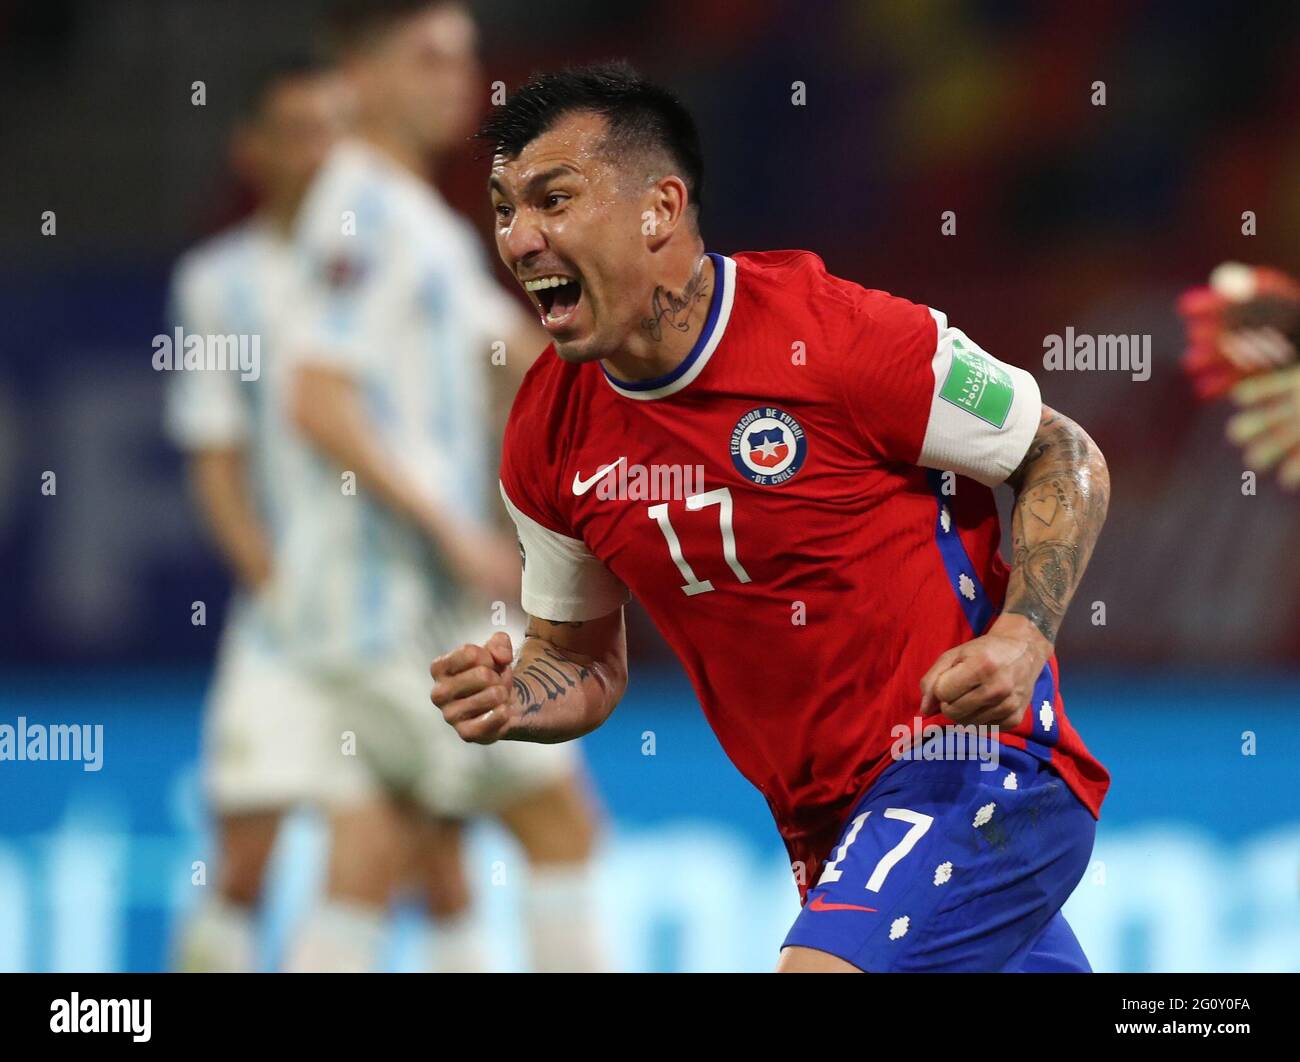 Chile's Gary Medel celebrates with Chile's Alexis Sanchez (without shirt)  after defeating Argentina to win the Copa America 2015 final soccer match  at the National Stadium in Santiago, Chile, July 4, 2015.